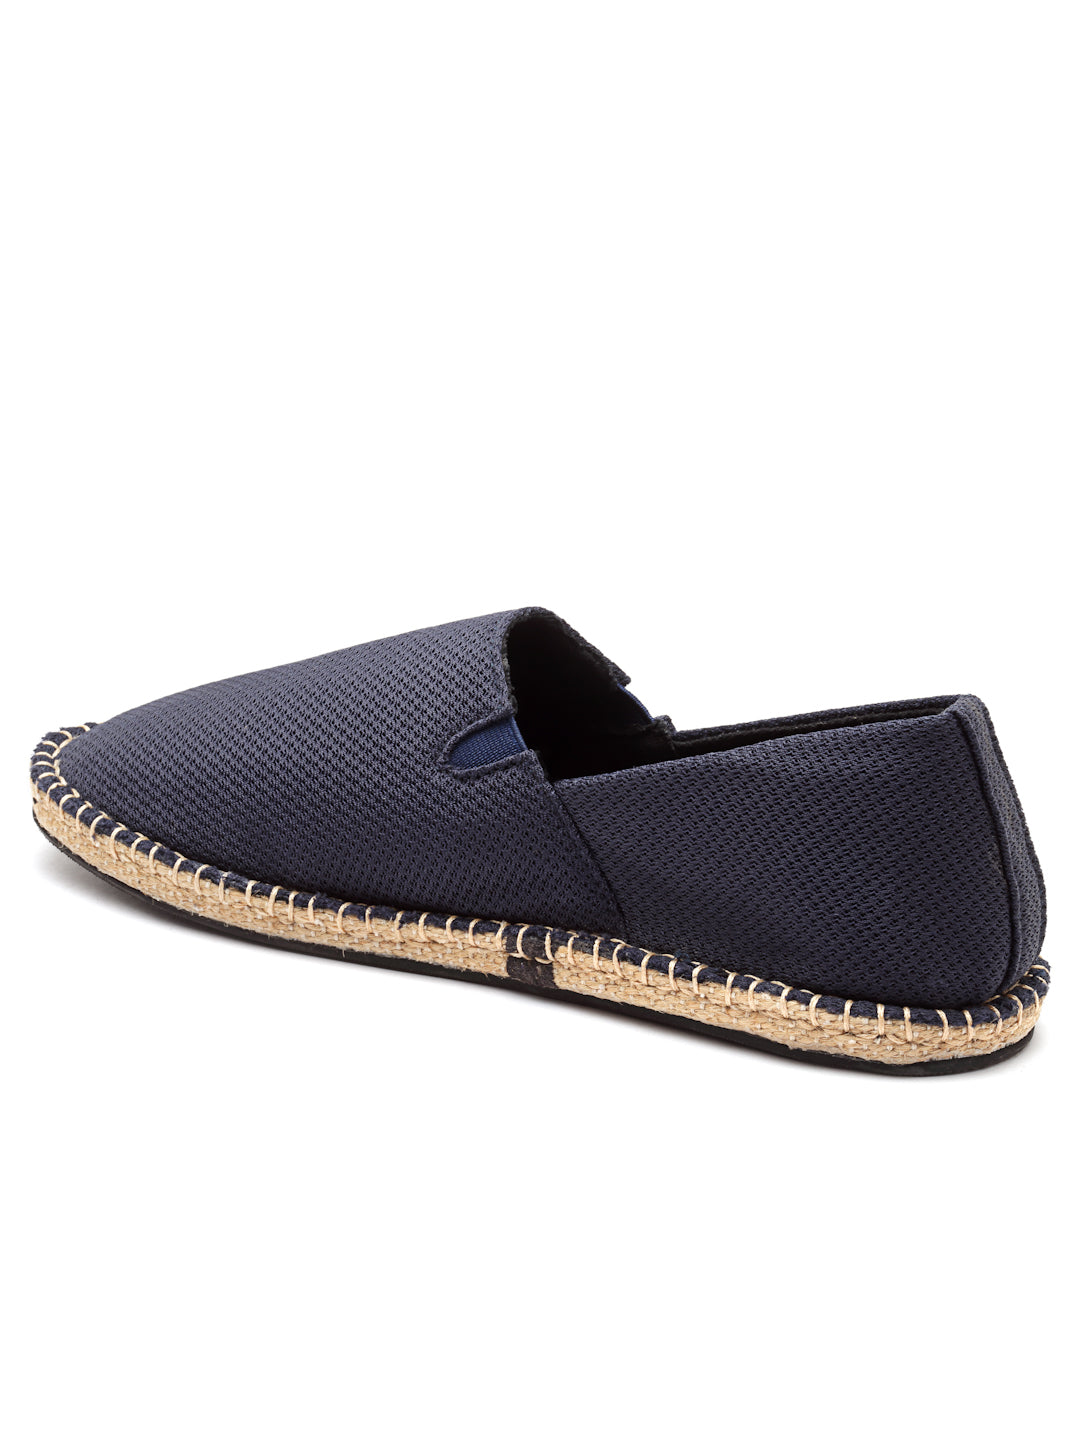 Navy Textile Comfortable Slip On Casual Shoes | Espadrilles